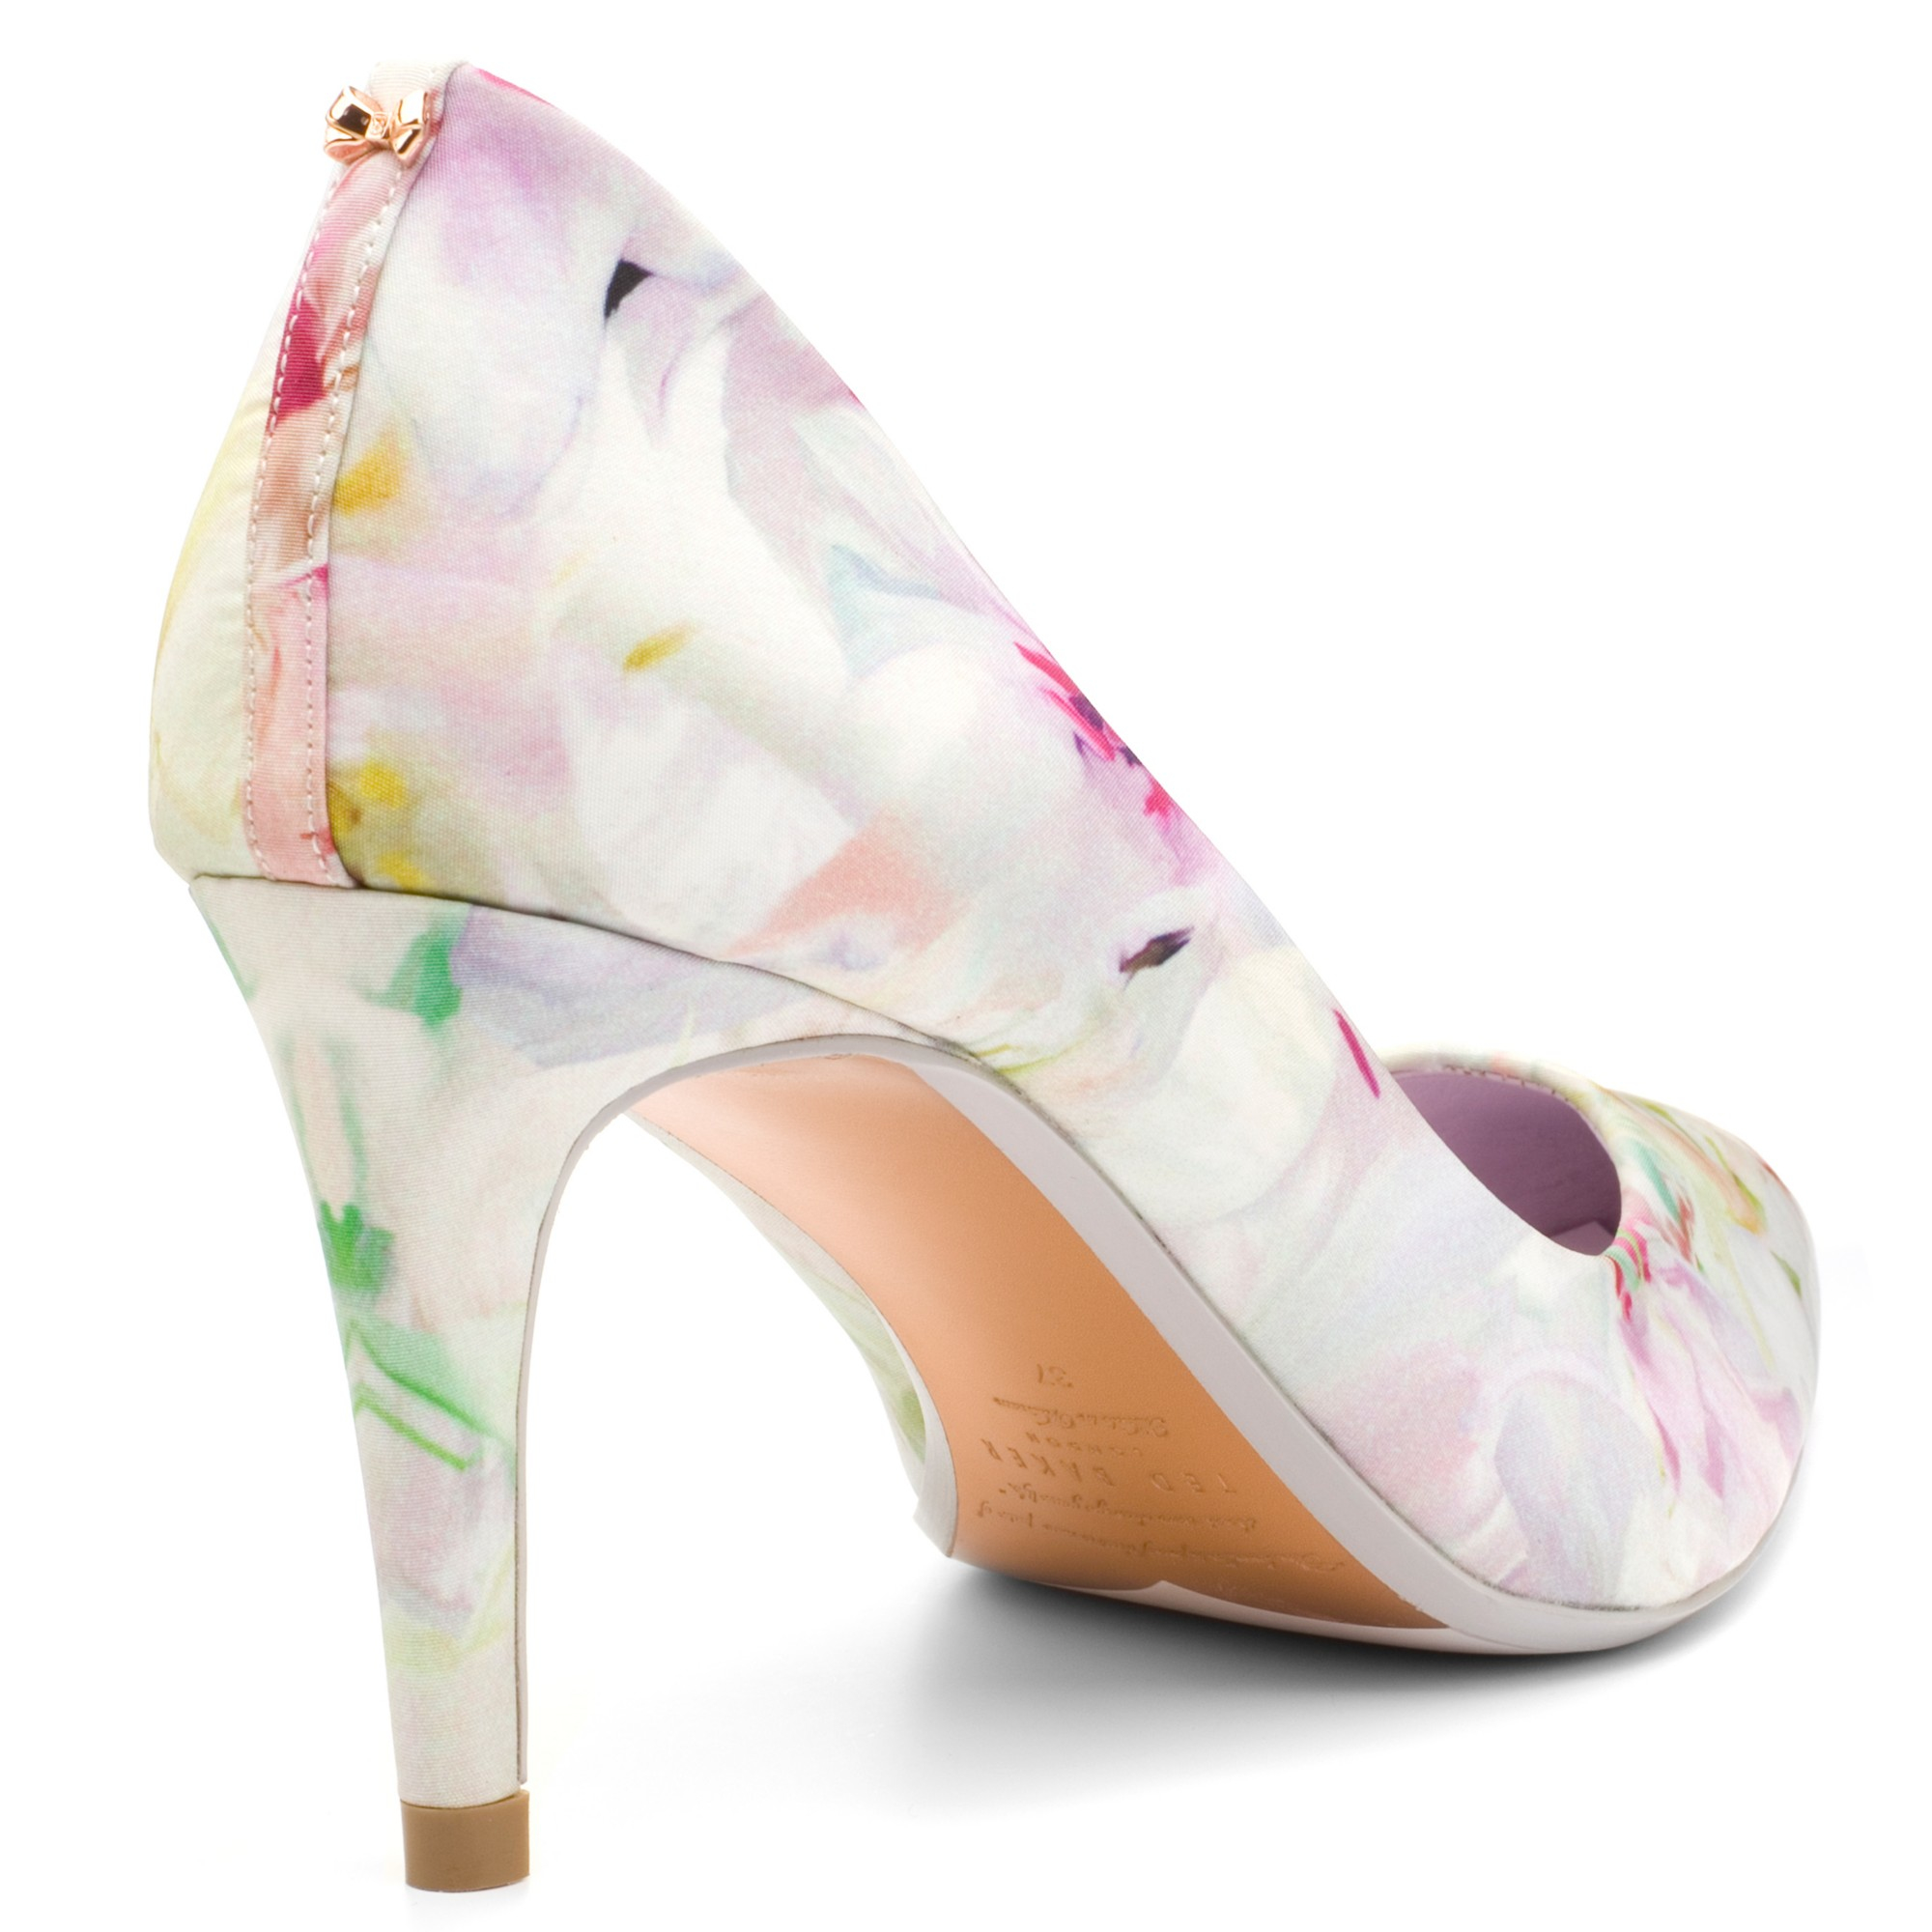 Ted Baker Denim Charmesa Floral Print Pointed Court Shoes in Pink - Lyst